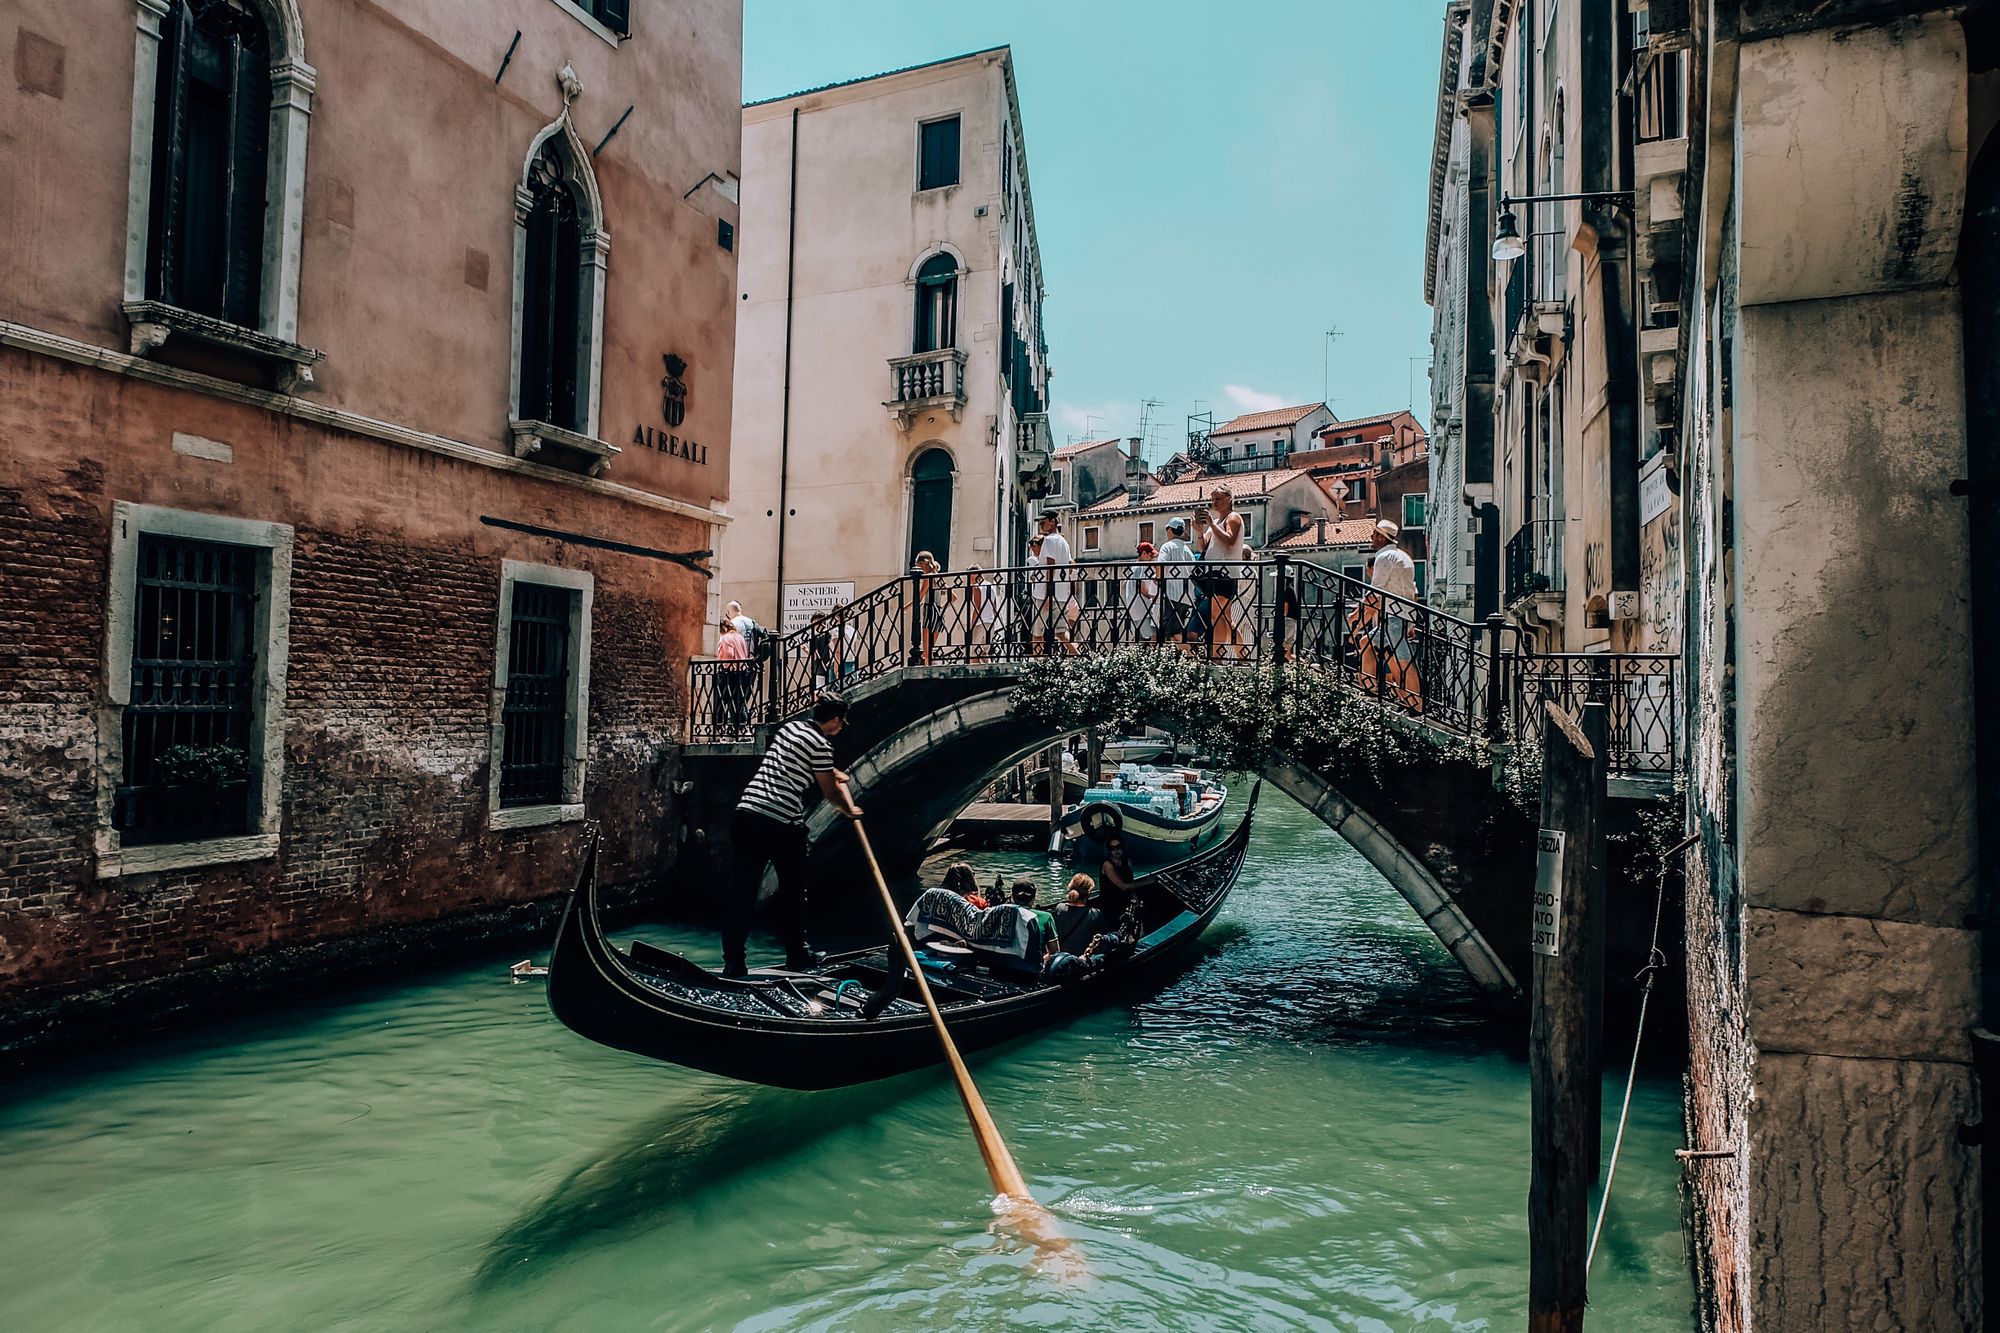 approach the locals while in Venice. In the pic: Venice gondola (Photo by Julia Khalimova - pexels)